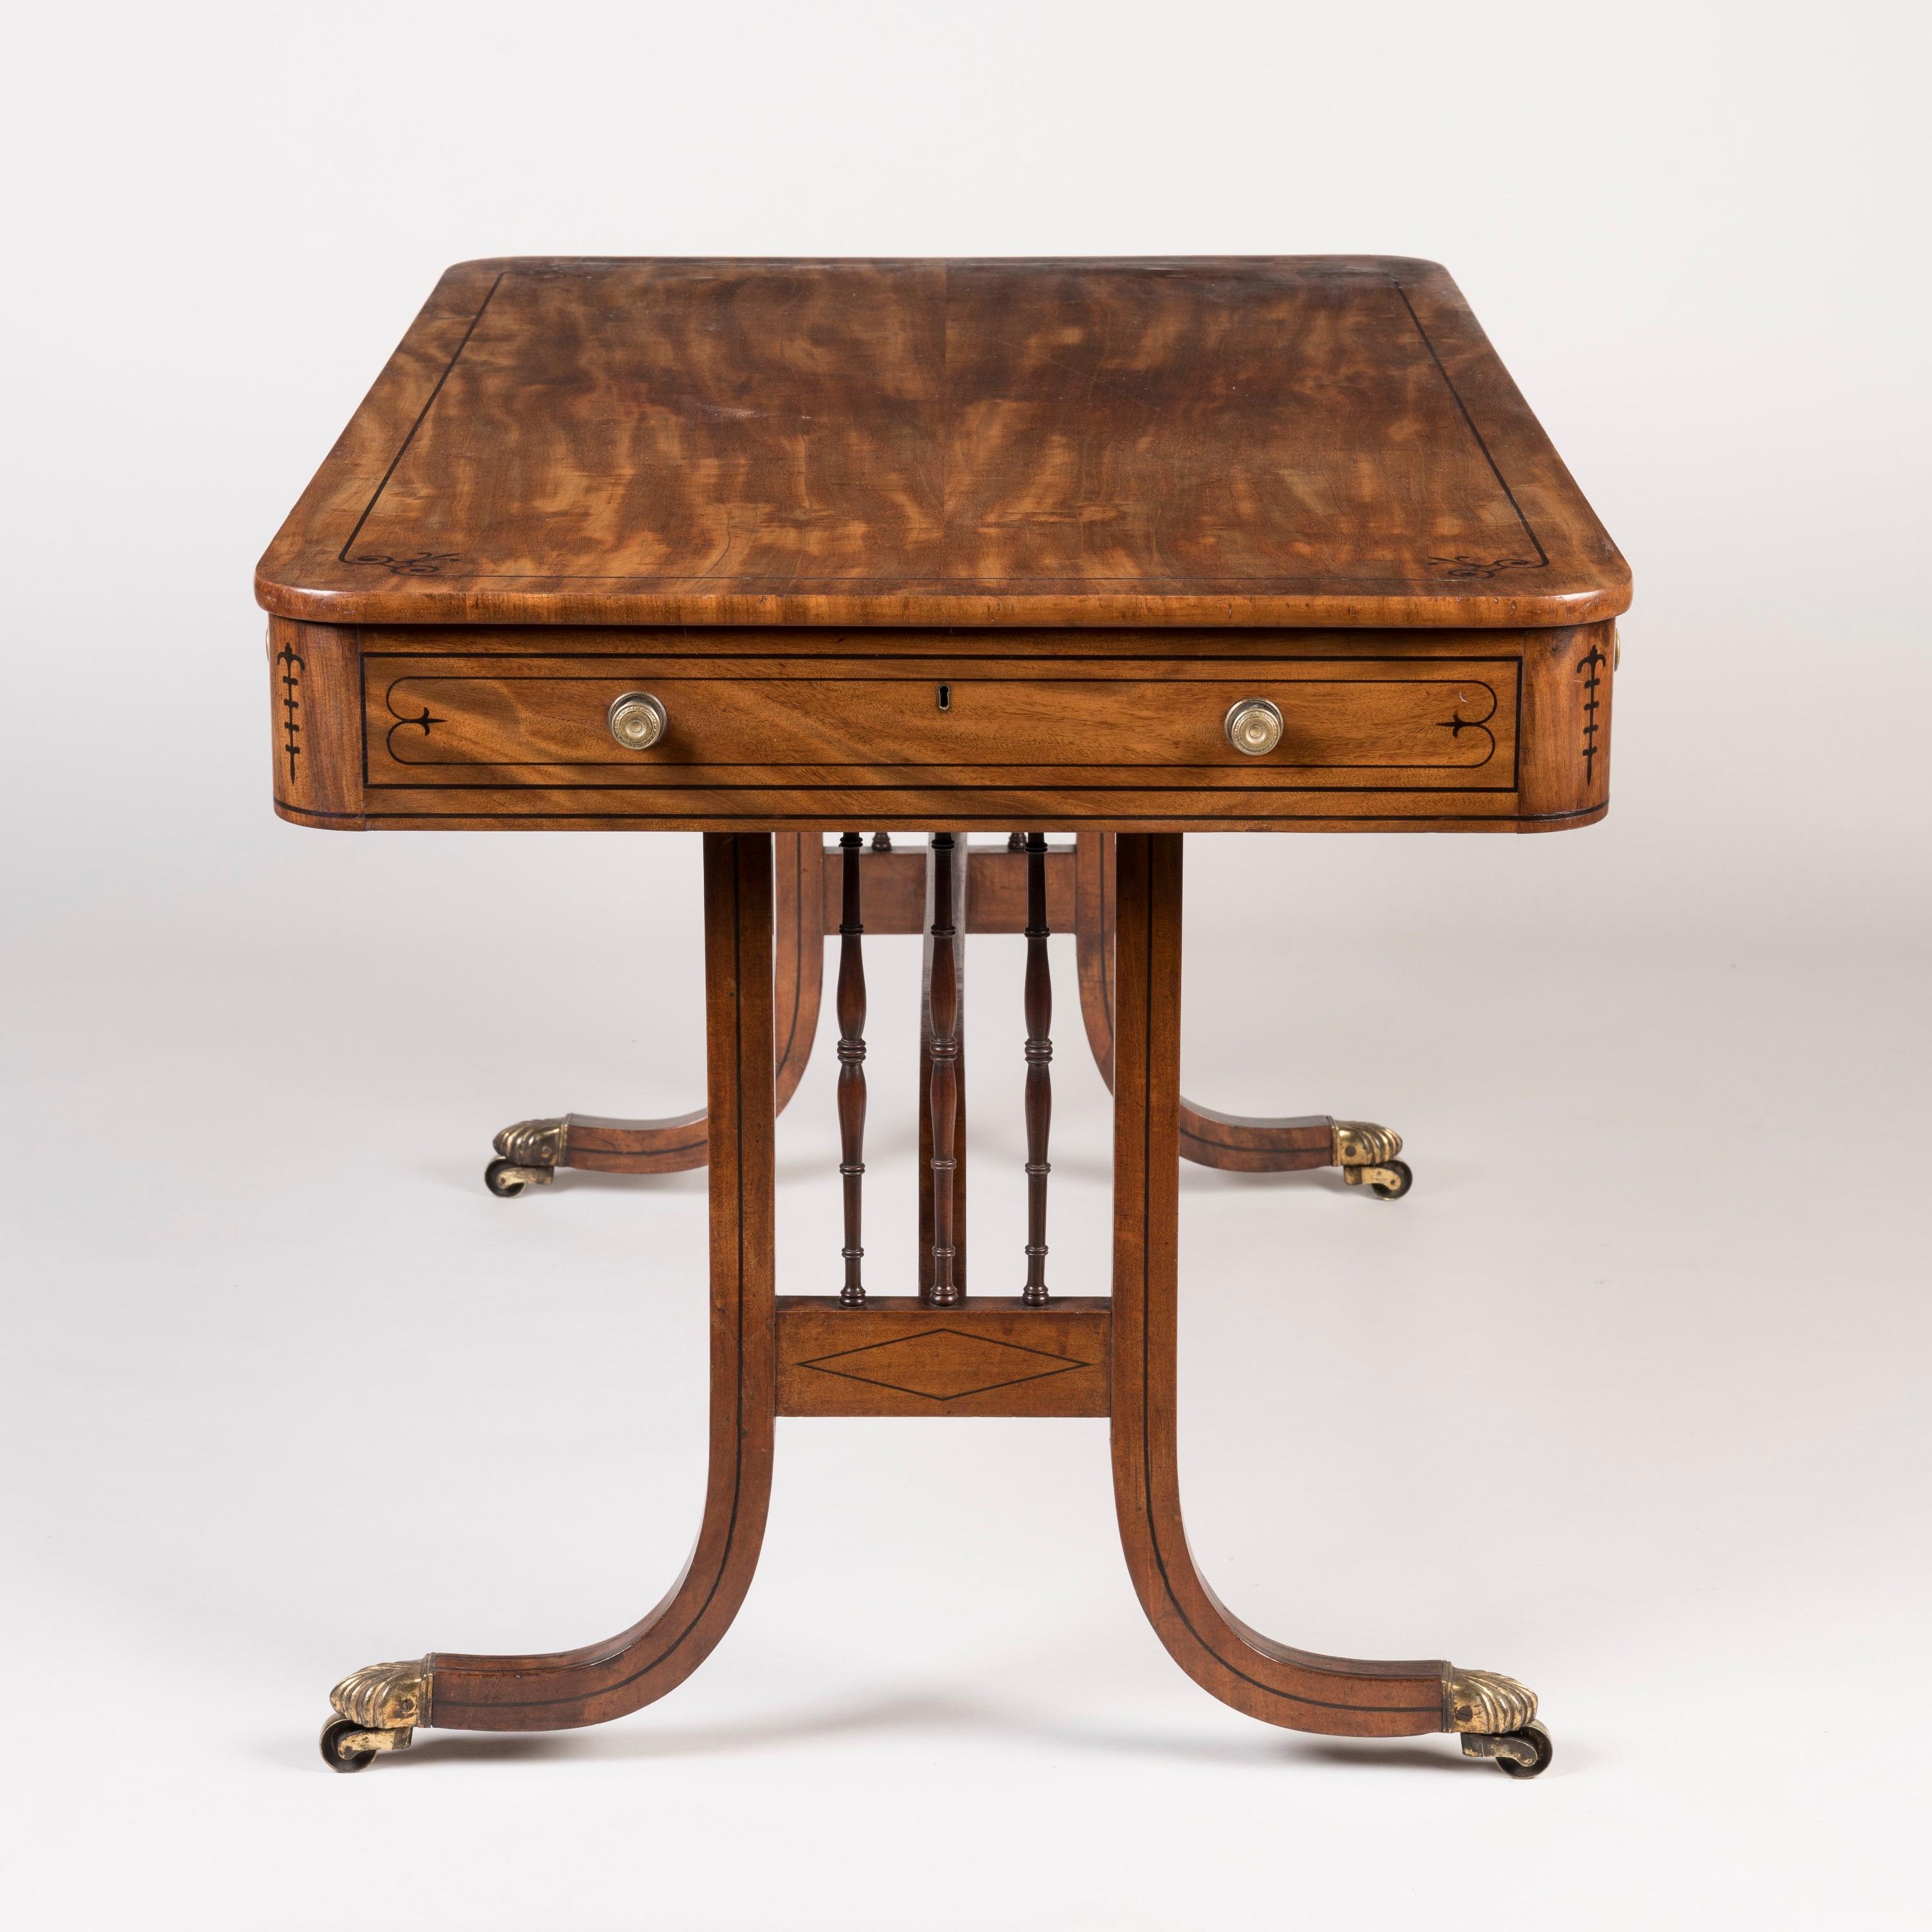 Brass Elegant English Regency Period Mahogany Table with Inlaid Details For Sale